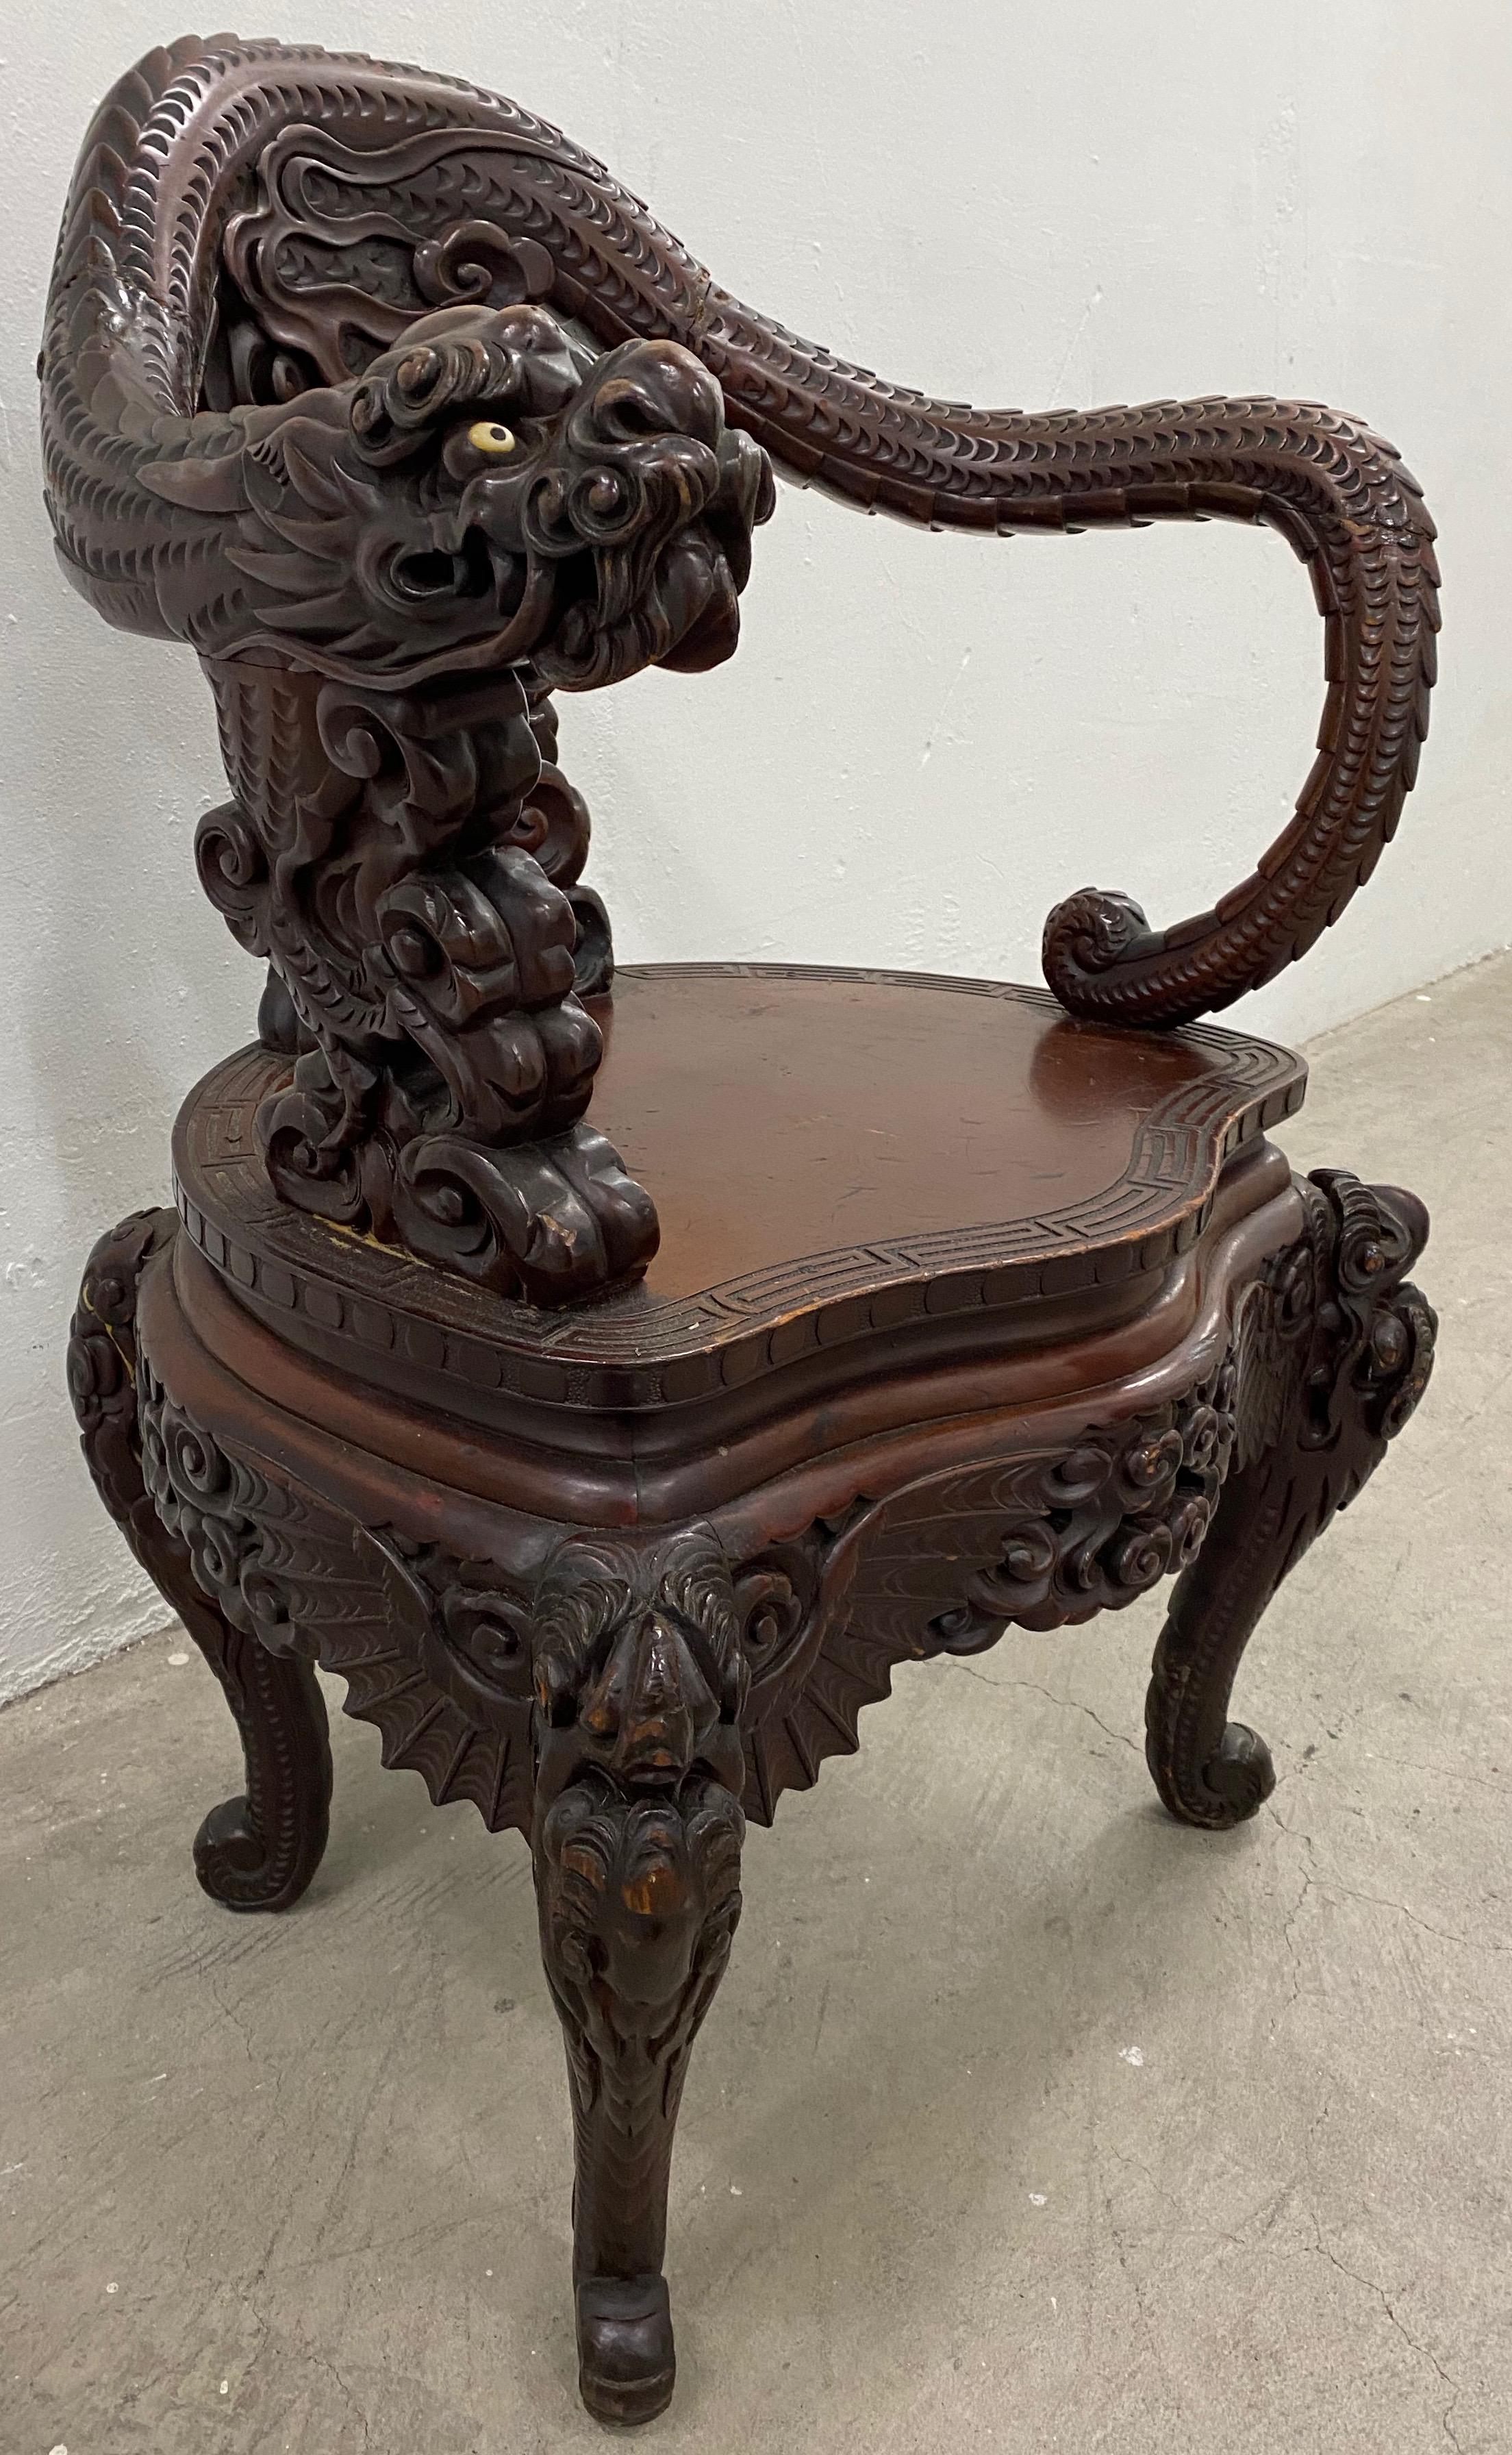 Antique Asian hand carved full body dragon armchair

Rare full body dragon arm / side chair carved by a talented cabinetmaker.

The chair has a rich patina that only comes with age.

Sitting in this chair your right arm will rest on the